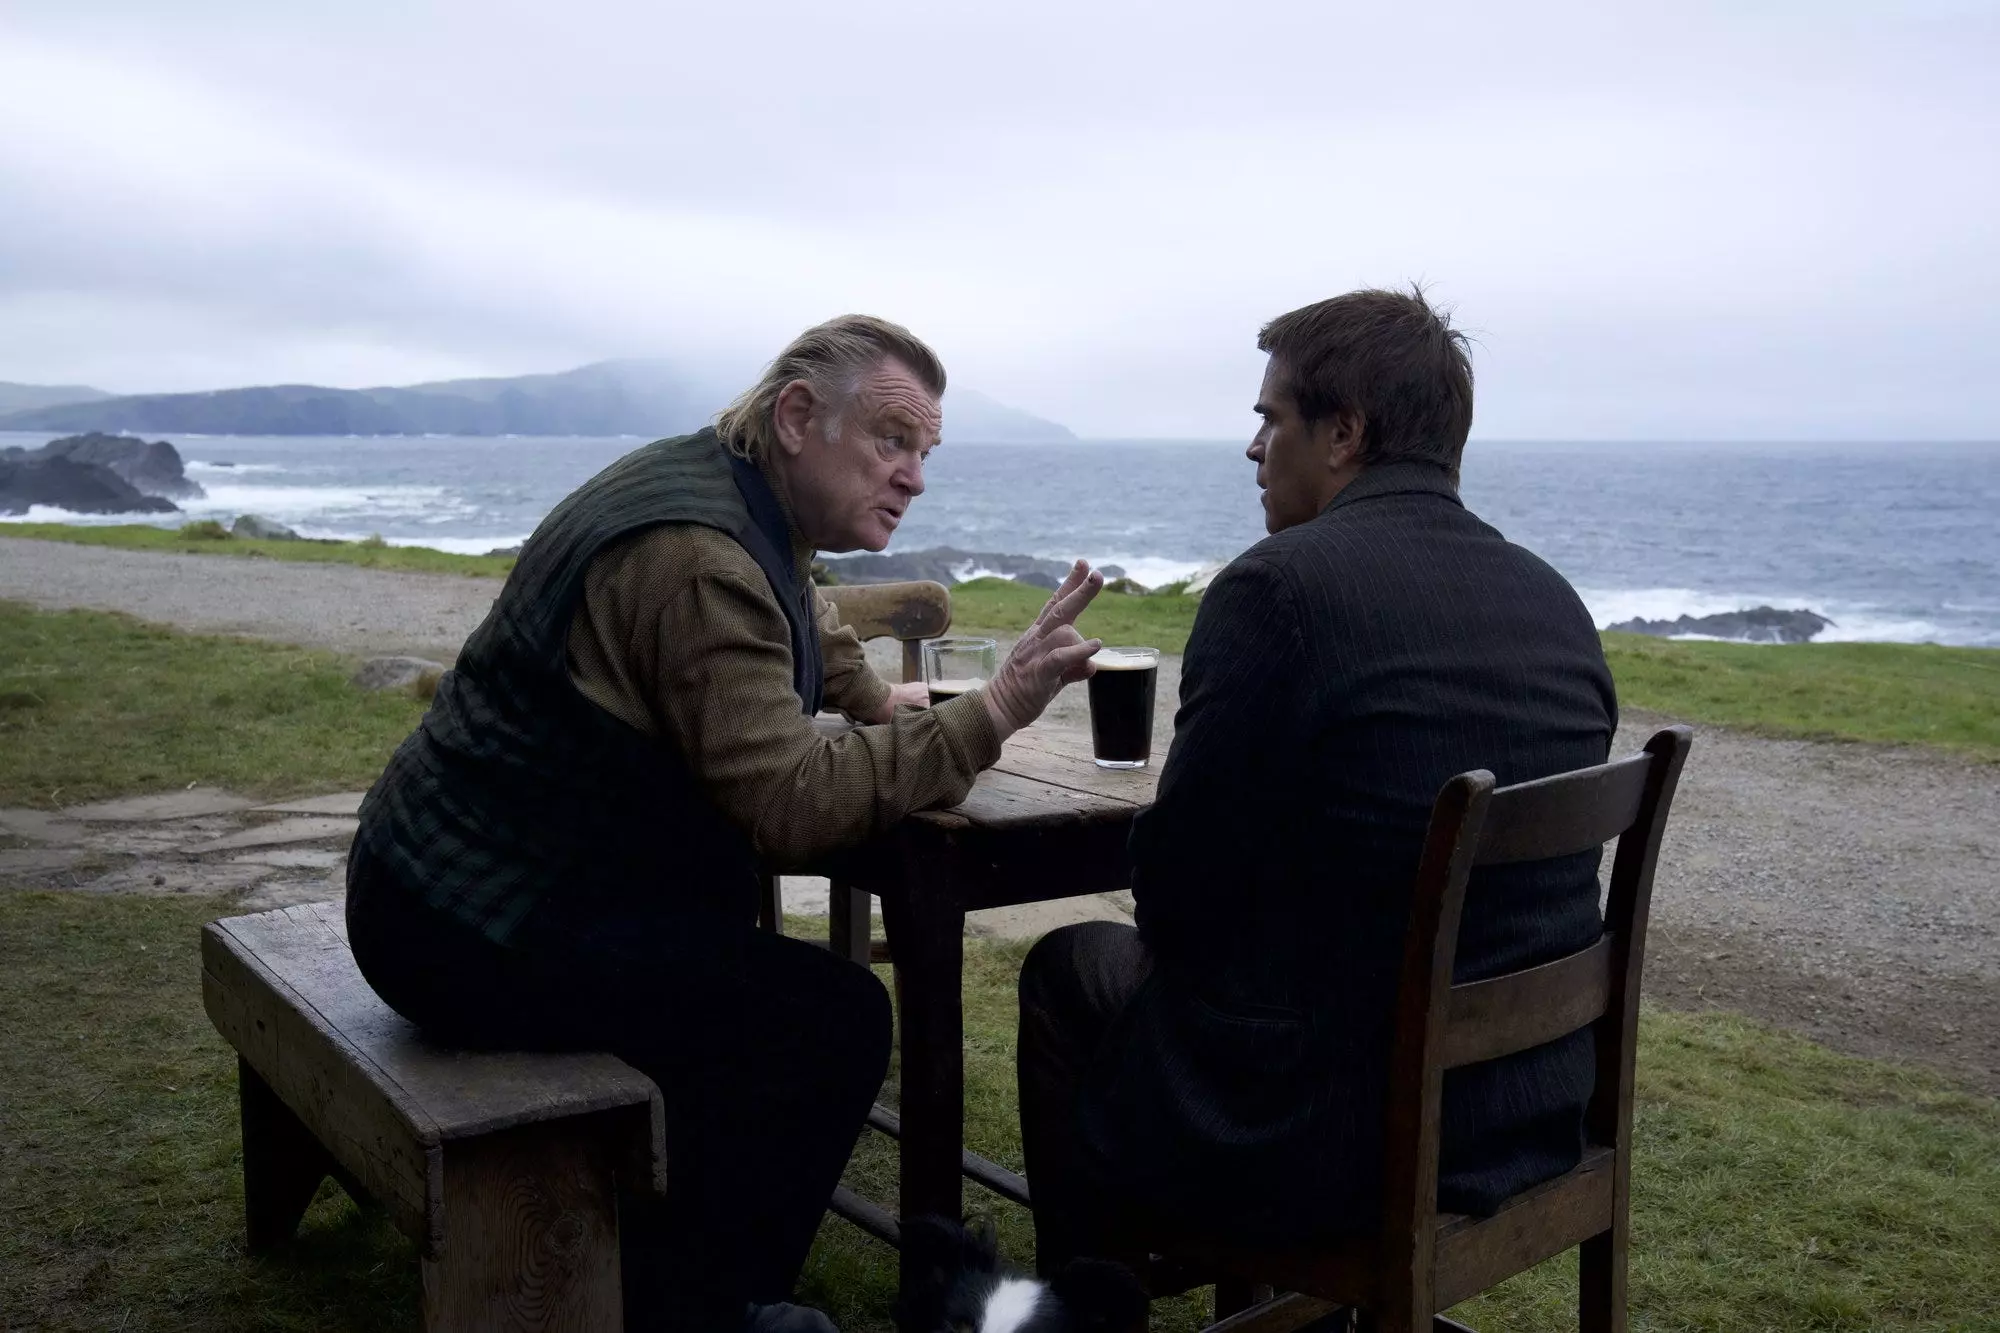 Colm (Brendan Gleeson, left) warns his former BFF Pádraic (Colin Farrell) to stay away from him in the dark comedy "The Banshees of Inisherin."